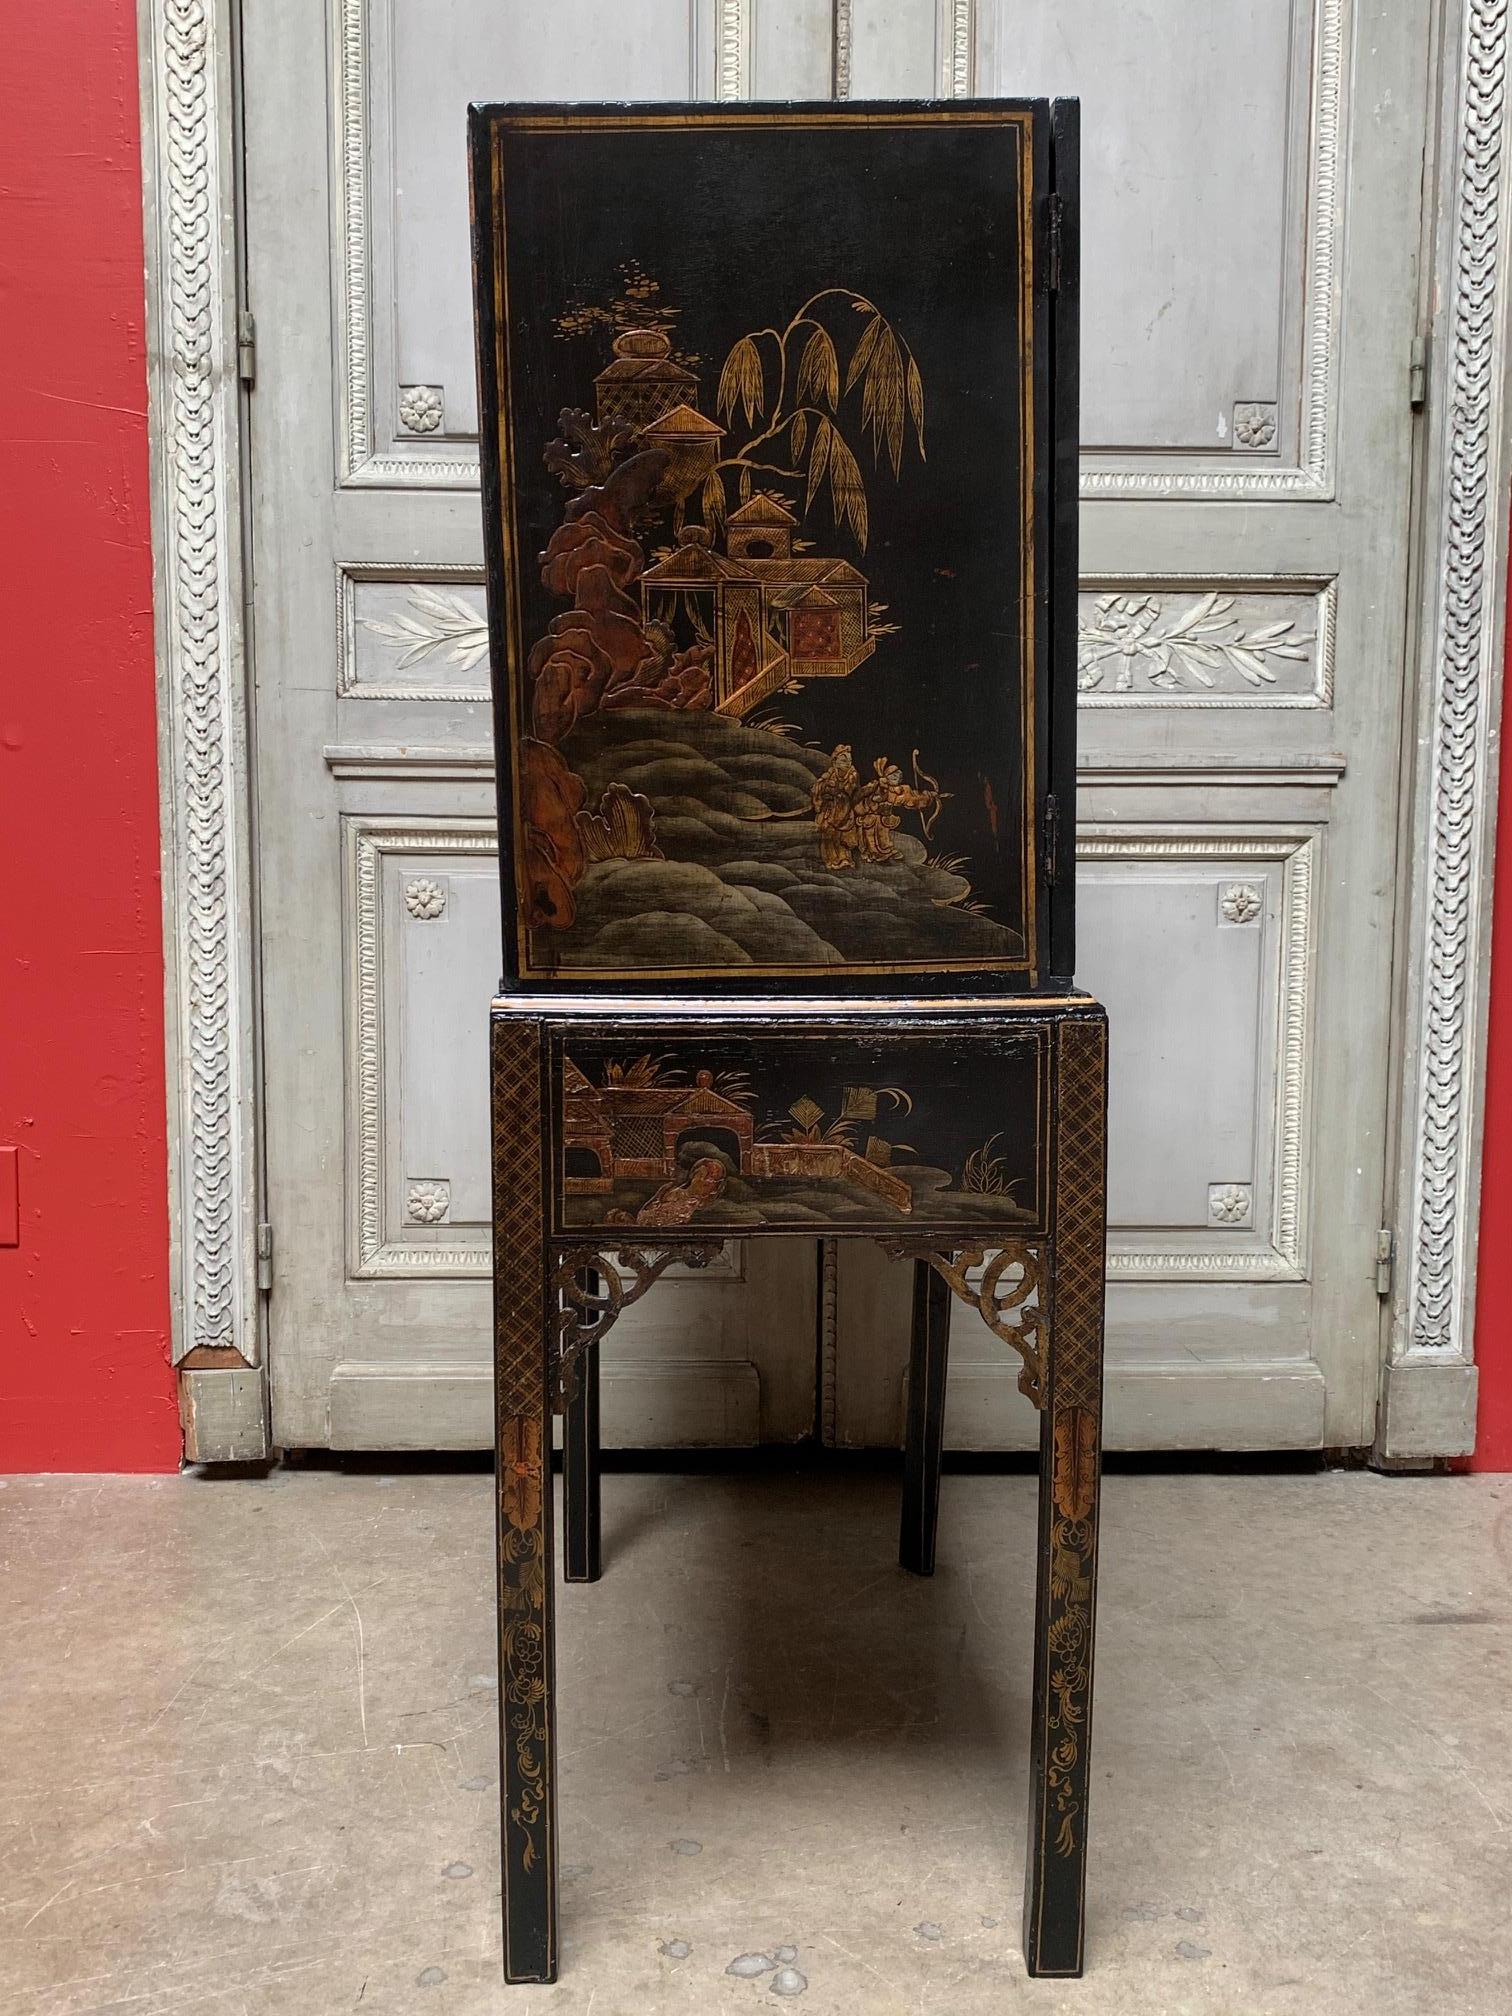 English chest on stand with a Japanned lacquered finish in black, gold and red dating from the mid-19th century. This cabinet has two doors with Chinoiserie decoration both on the exterior and interior, open to a concealed interior of decorated